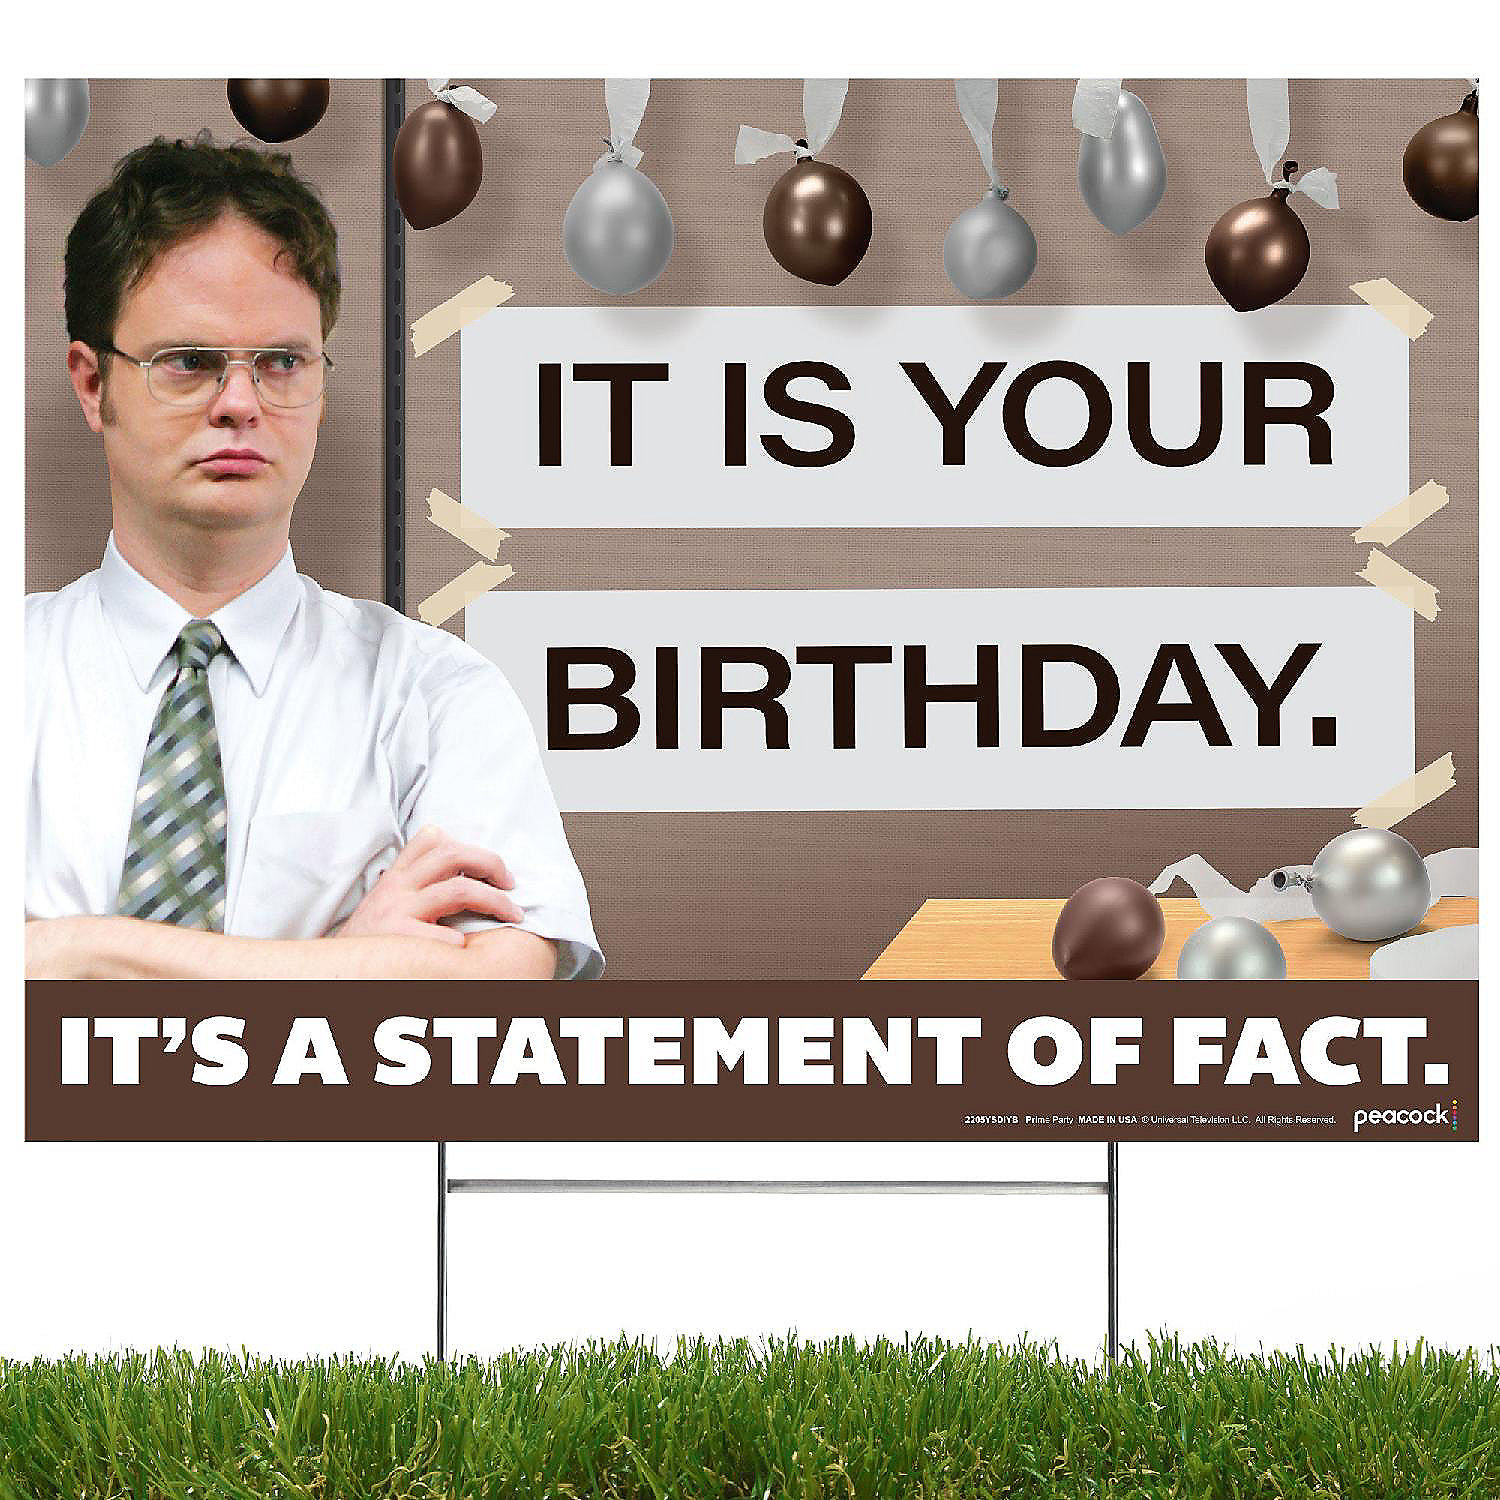 Prime Party Dwight Schrute It is Your Birthday Yard Sign, The Office |  Oriental Trading